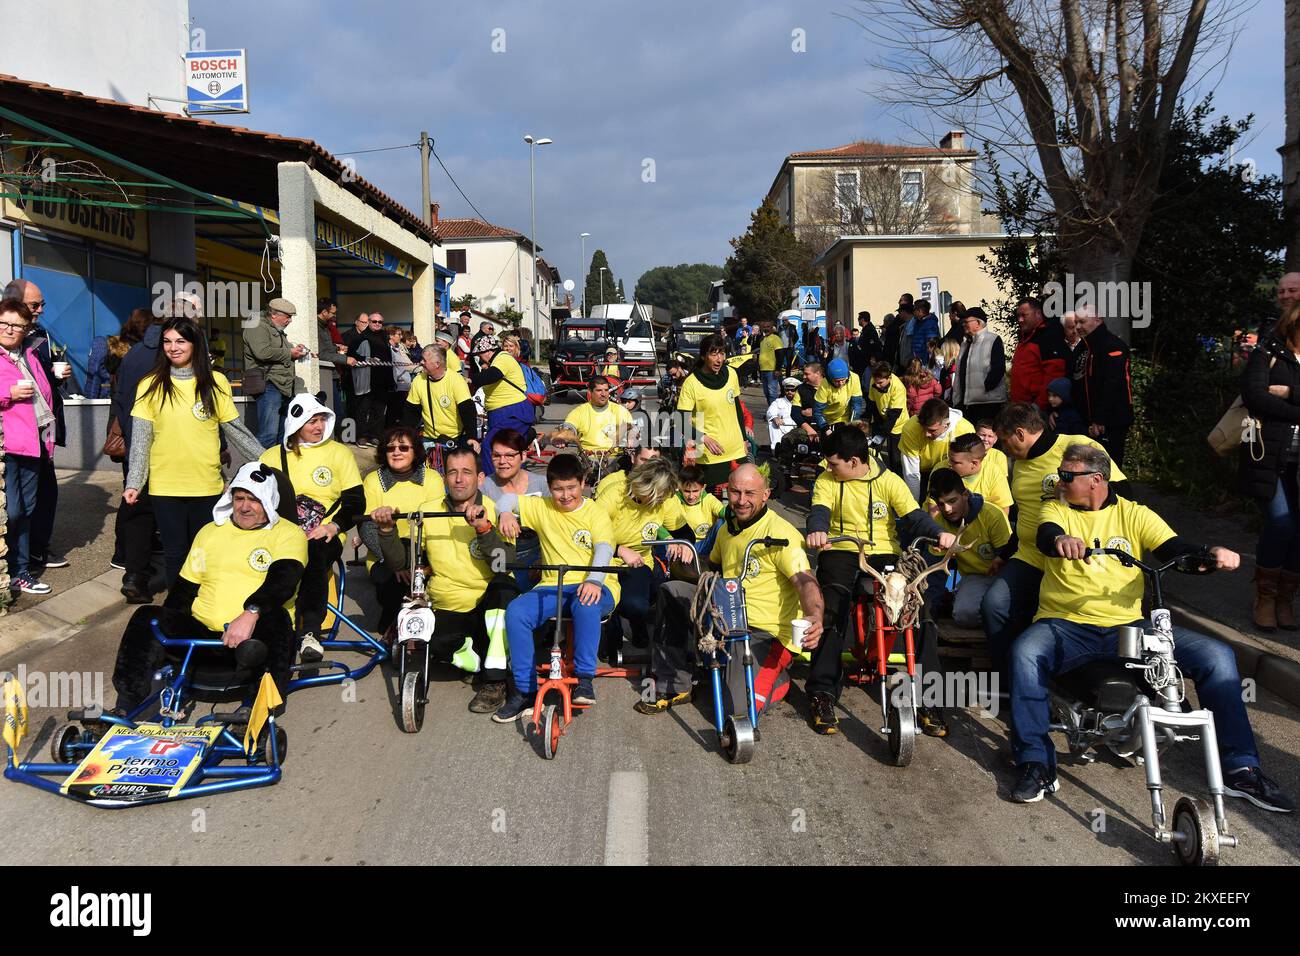 02.02.2020., Croatia, Pula - This sunday at Veli Vrh was held fourth in a row Balinjerada (soapbox race) exciting race of self-made vehicles that run on ball-bearings (known locally as "balinjere" â€“ hence the name) instead of wheels. The Balinjerada is partly a race in which the "pilots" of these unusual homemade vehicles must show their driving skills, and partly a carnival parade, in which carnival groups make ironic comments on current events in society with their imaginative constructions, in which they have invested months of effort. Photo: Dusko Marusic /PIXSELL Stock Photo